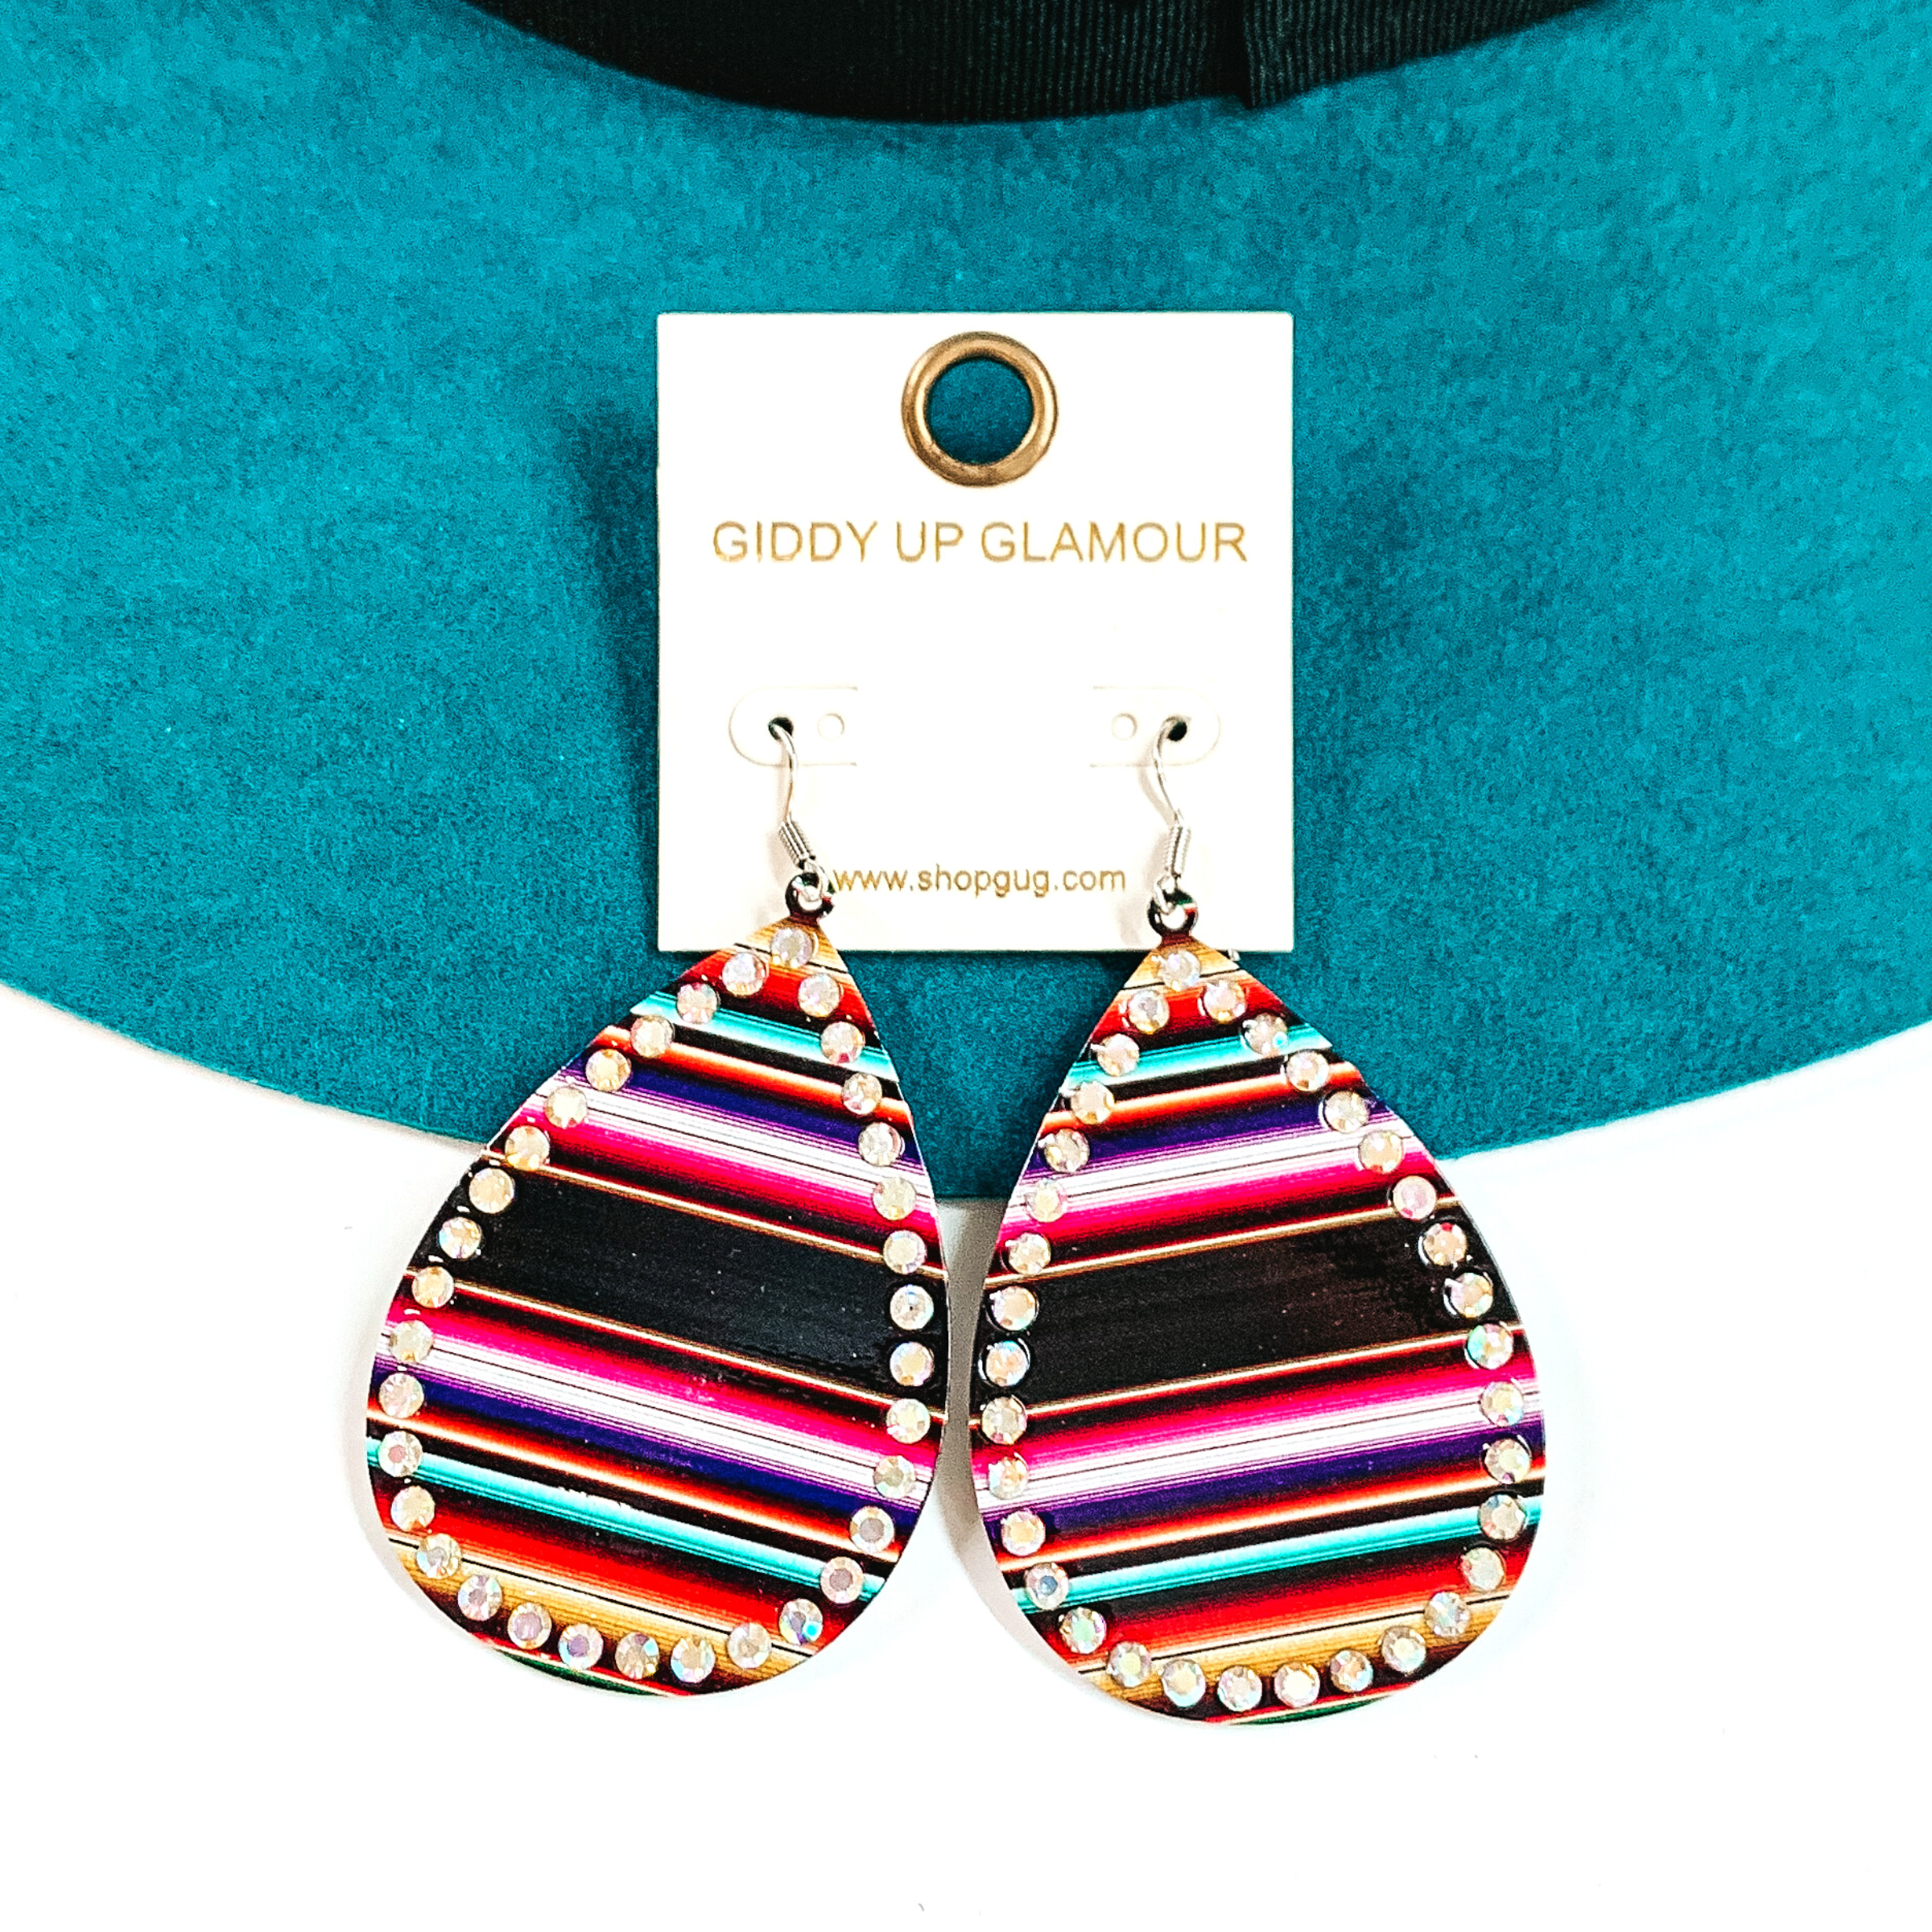 These are teardrop serape print earrings with ab crystals all around. The serape print  is in a black mix such as; black, purple, turquoise, pink, and a bit of red. These  earrings are taken on a teal felt hat brim and on a white background.